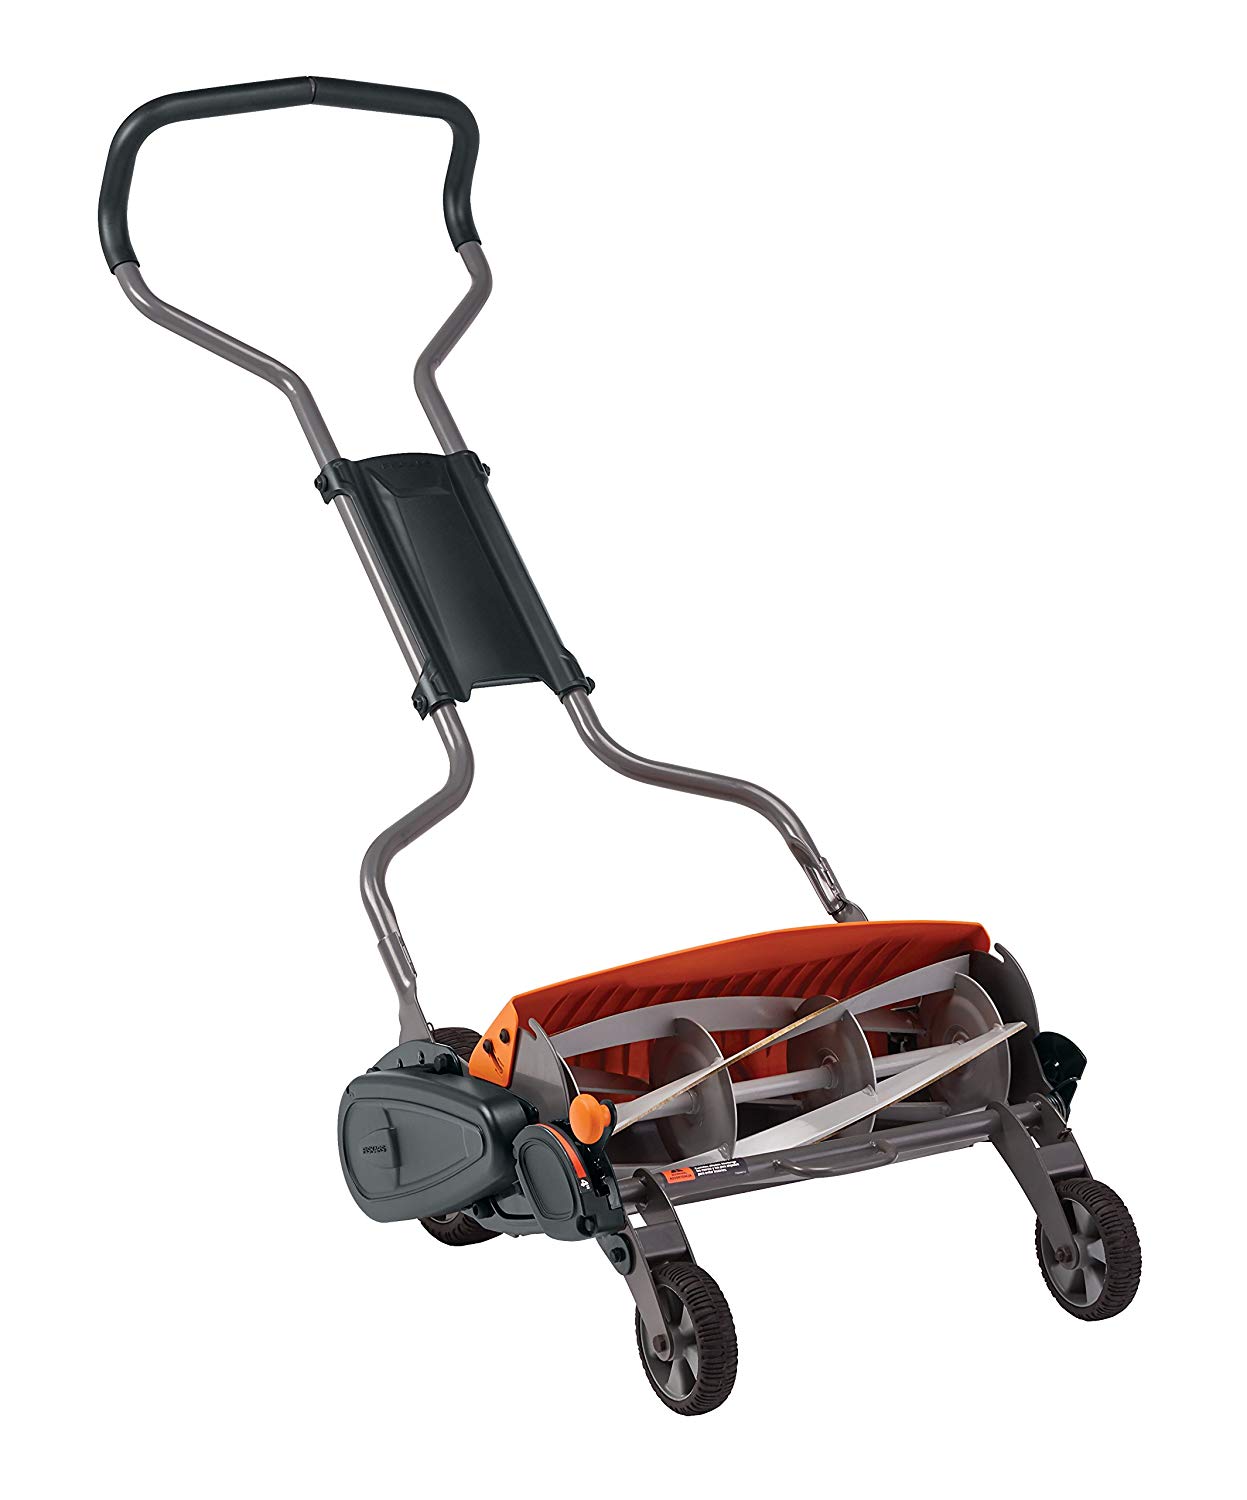 Cable and wireless cwt2100 manual lawn mower